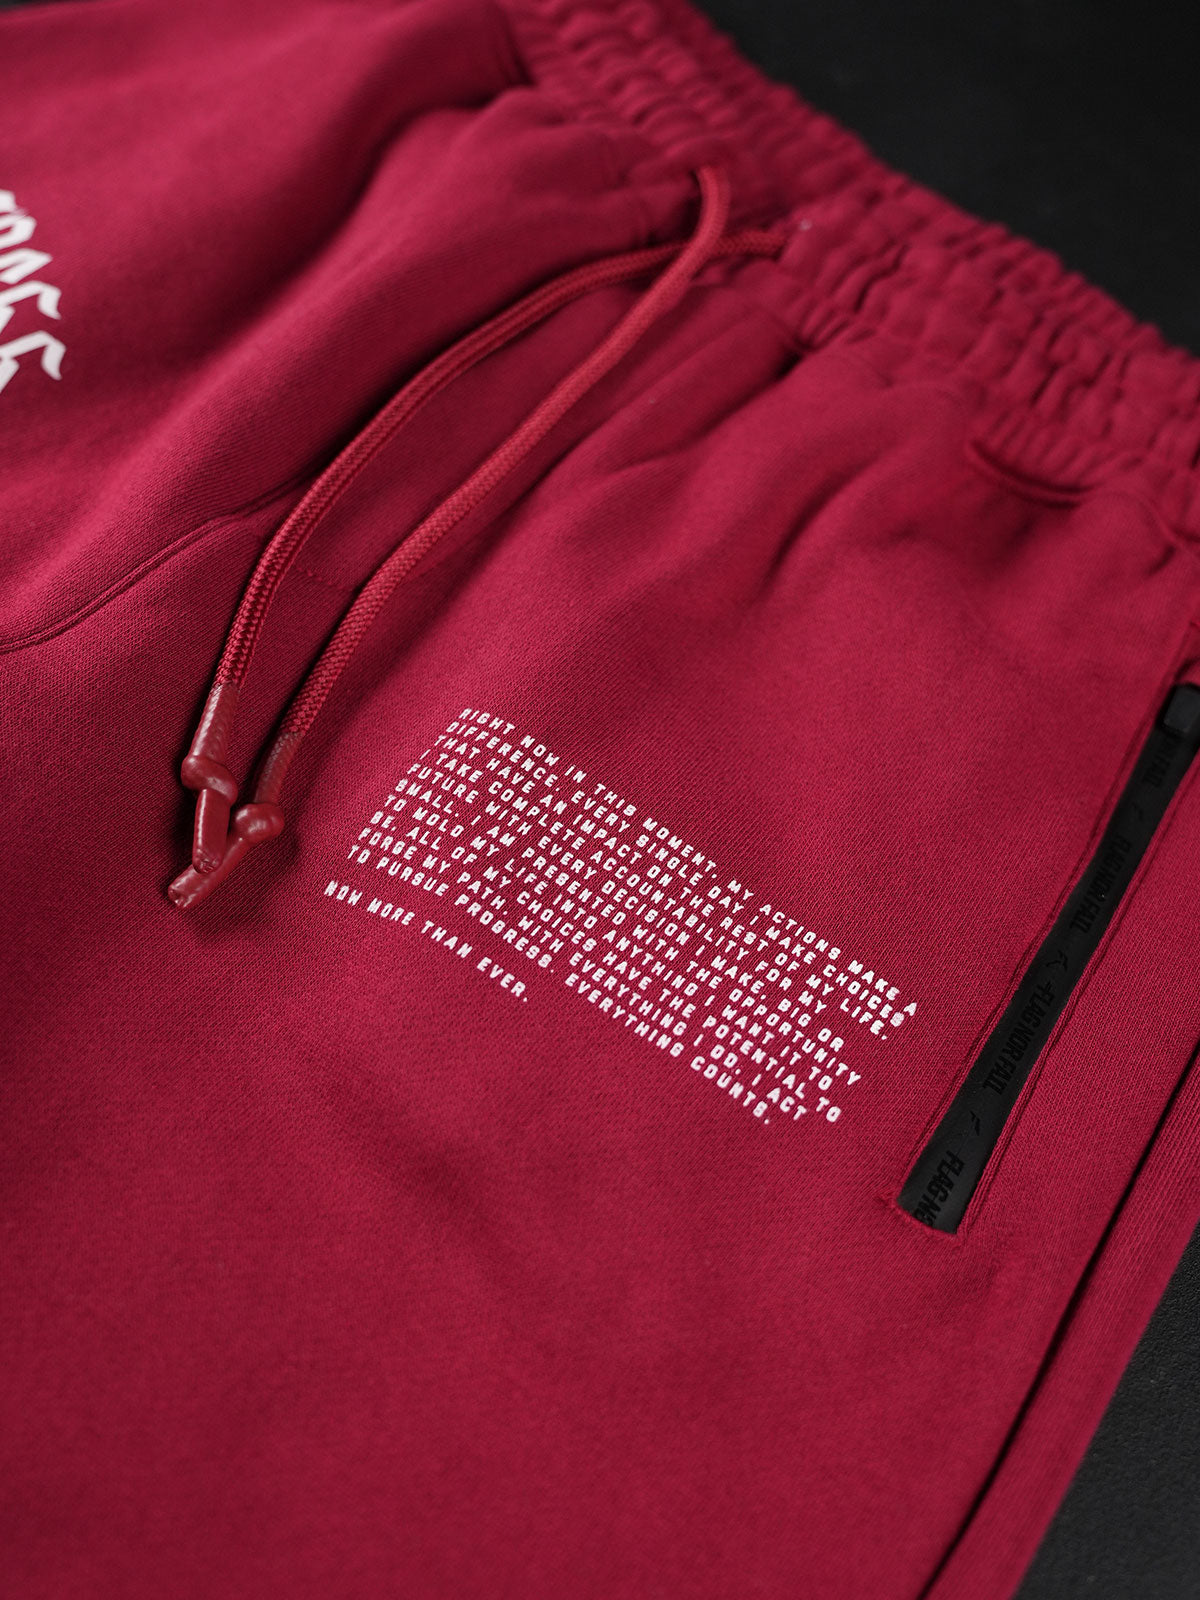 PROGRESS FITTED JOGGER- MAROON